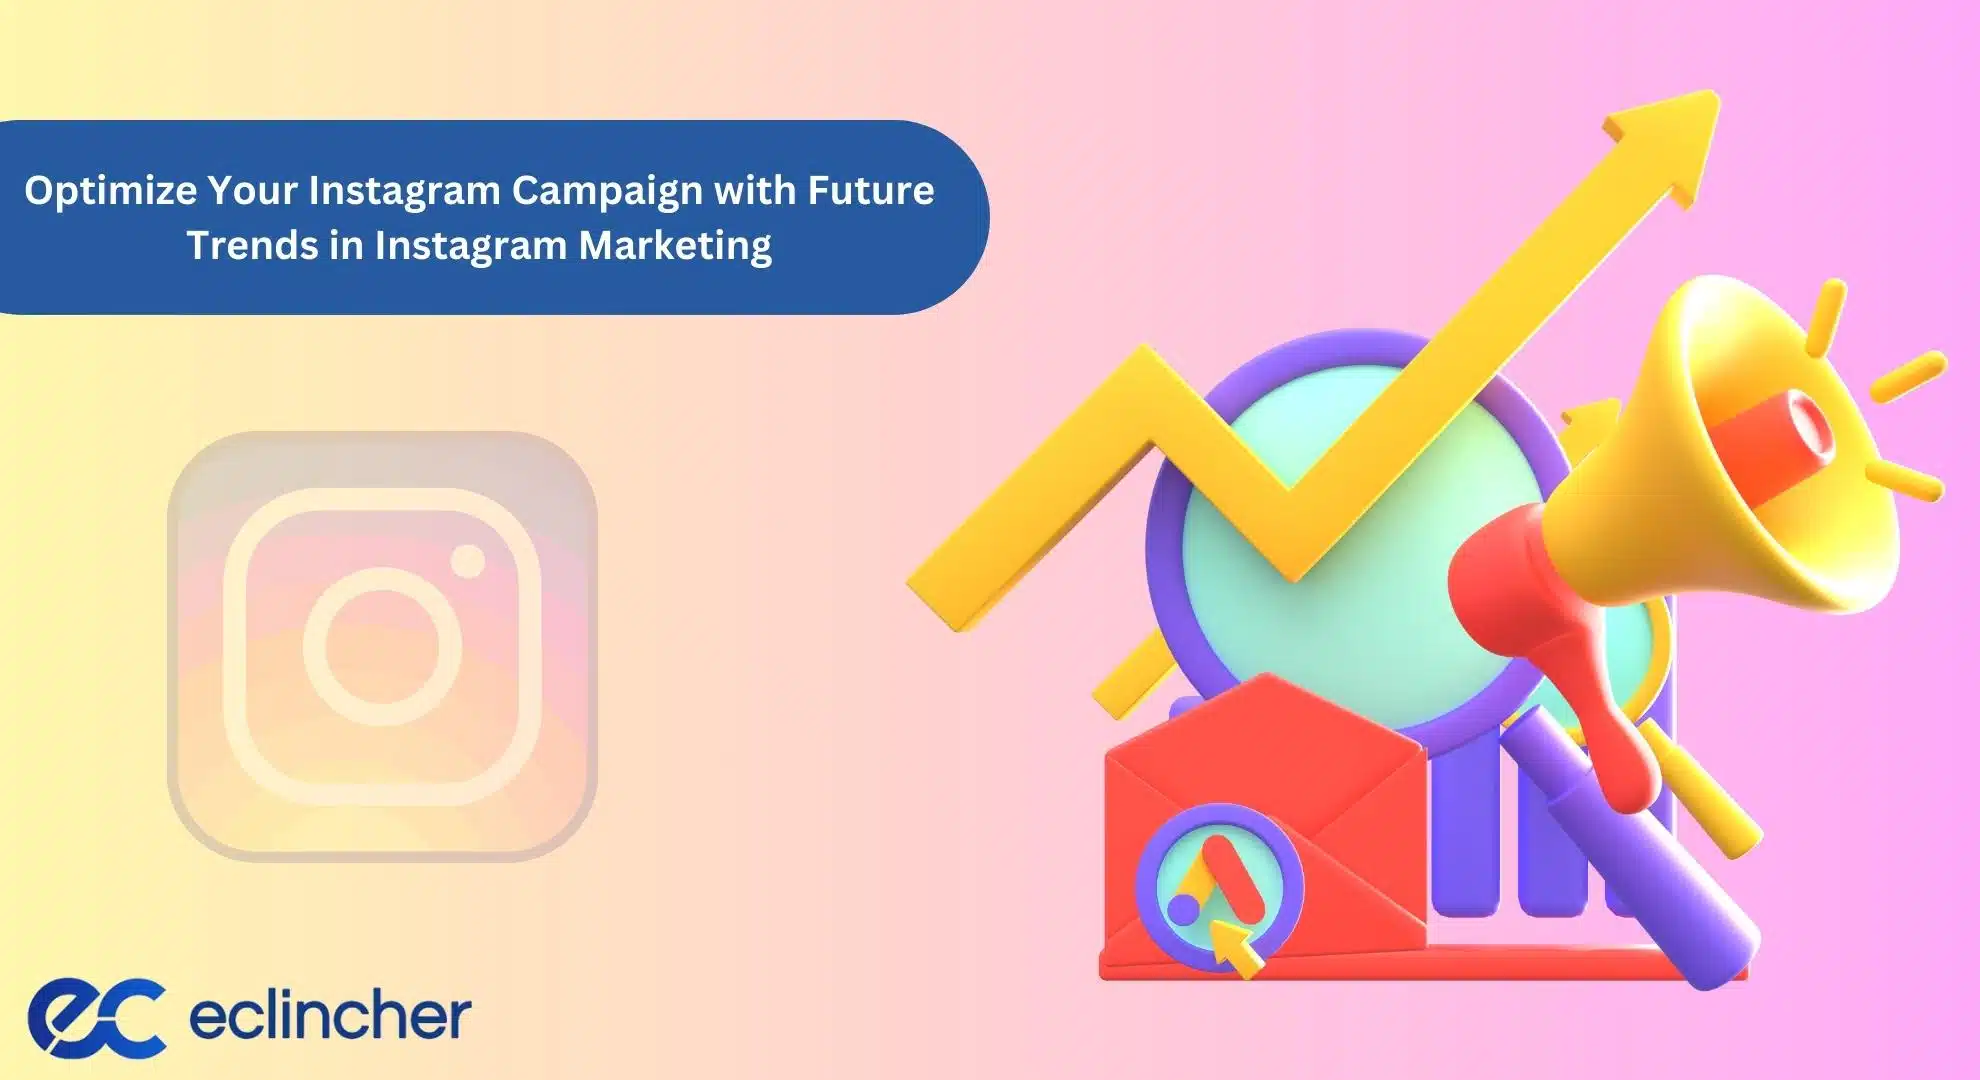 Optimize Your Instagram Campaign with Future Trends in Instagram Marketing